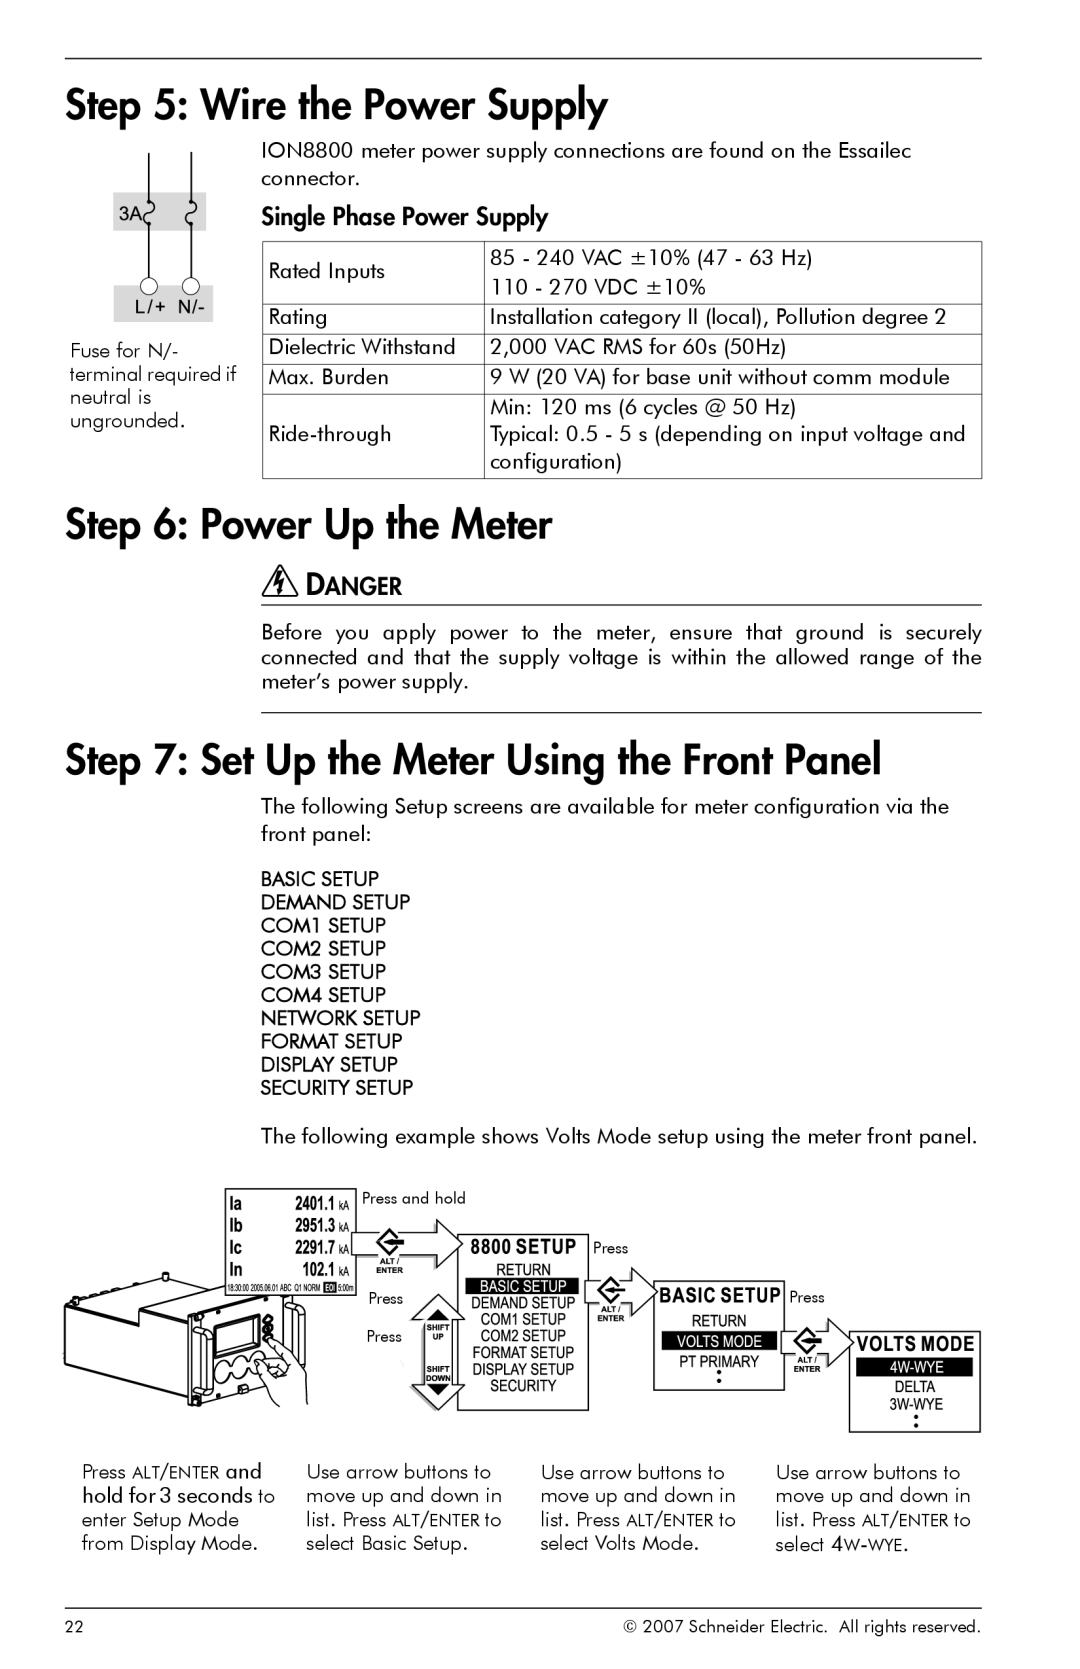 Schneider Electric ION8800 manual Wire the Power Supply, Power Up the Meter, Set Up the Meter Using the Front Panel, Danger 